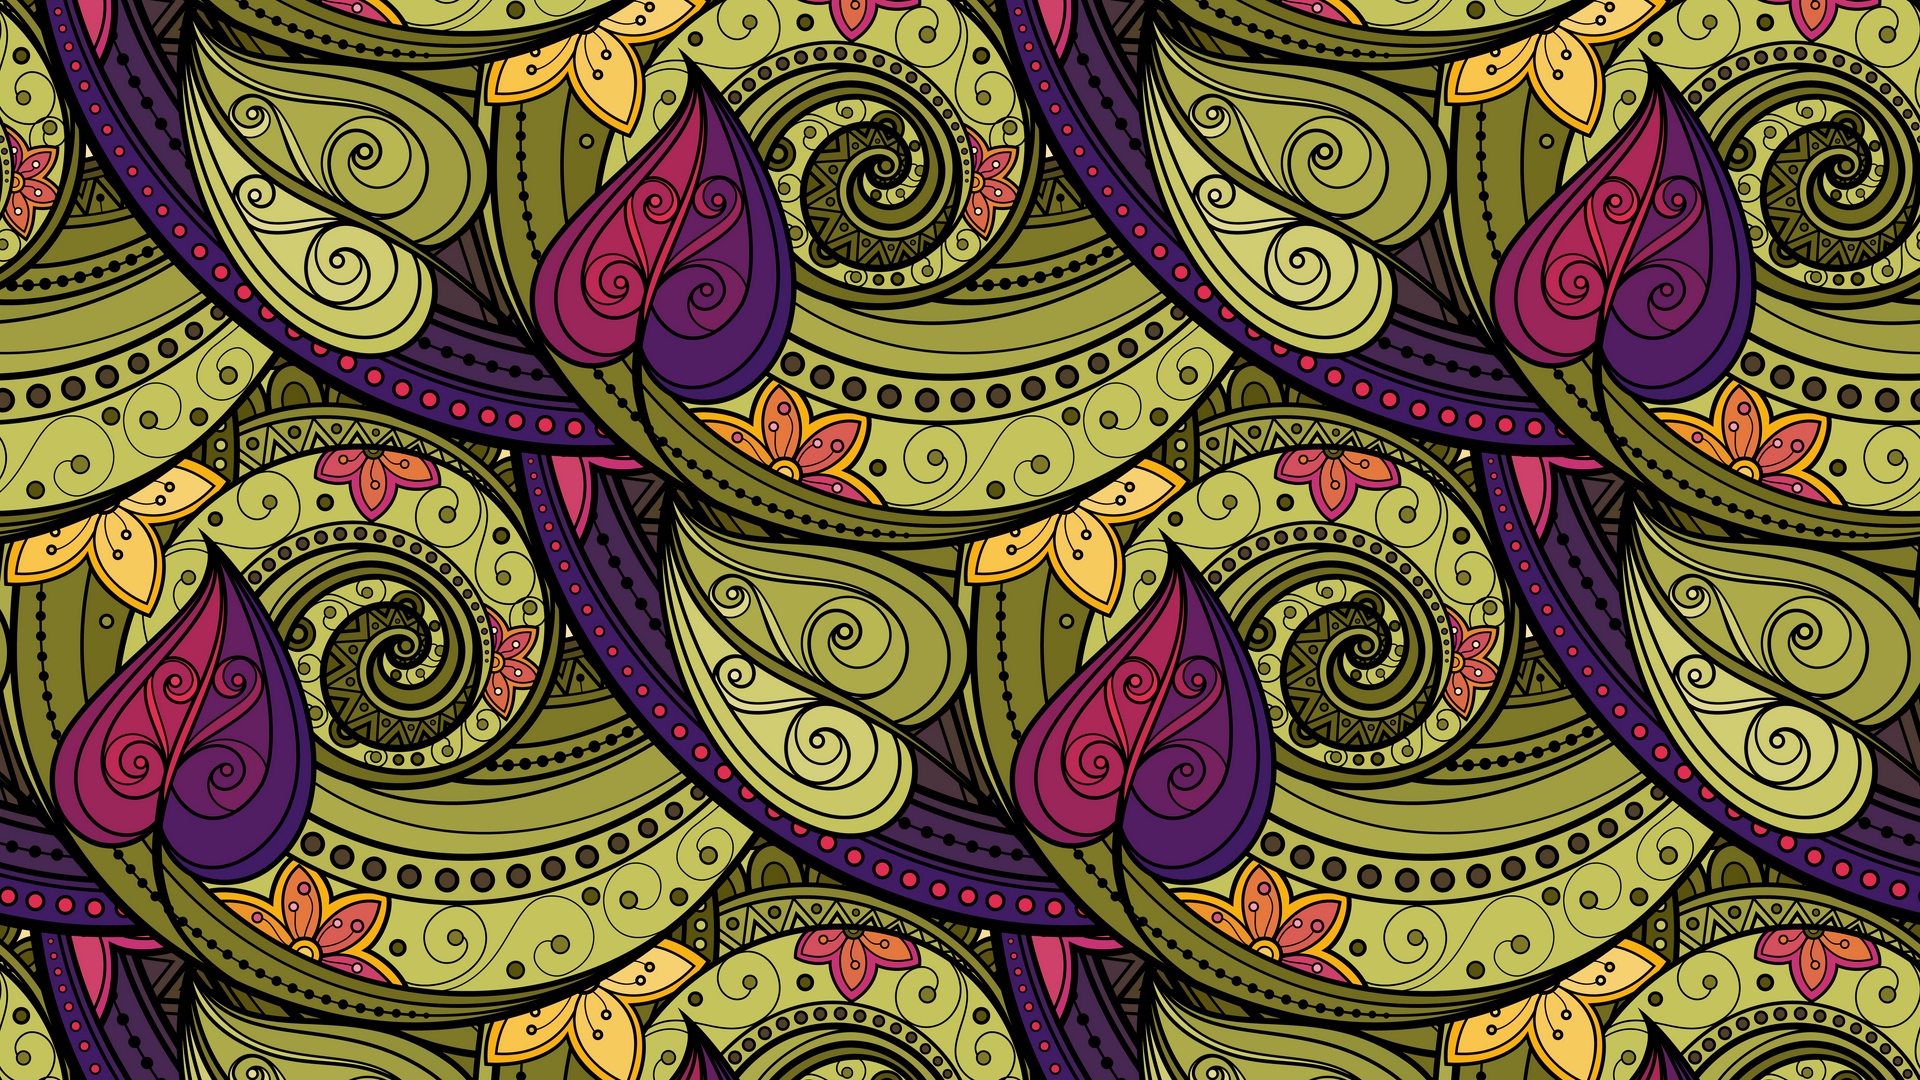 Wallpaper Patterns, Doodles, Twirled, Leaves - High Resolution Psychedelic Art Background - HD Wallpaper 